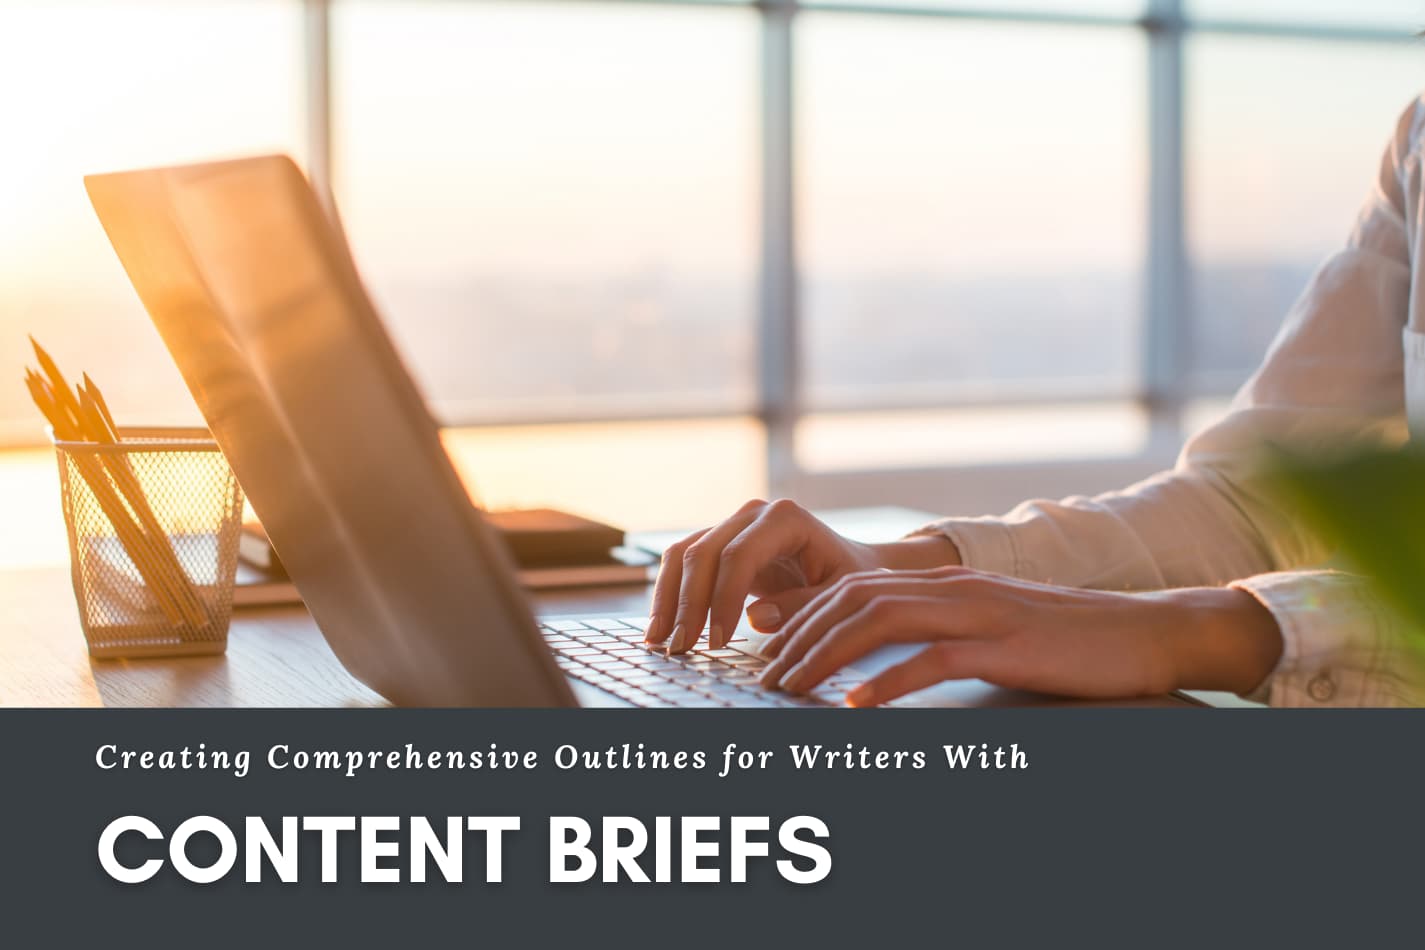 Why Write Content Briefs For Outsourcing to Content Writers